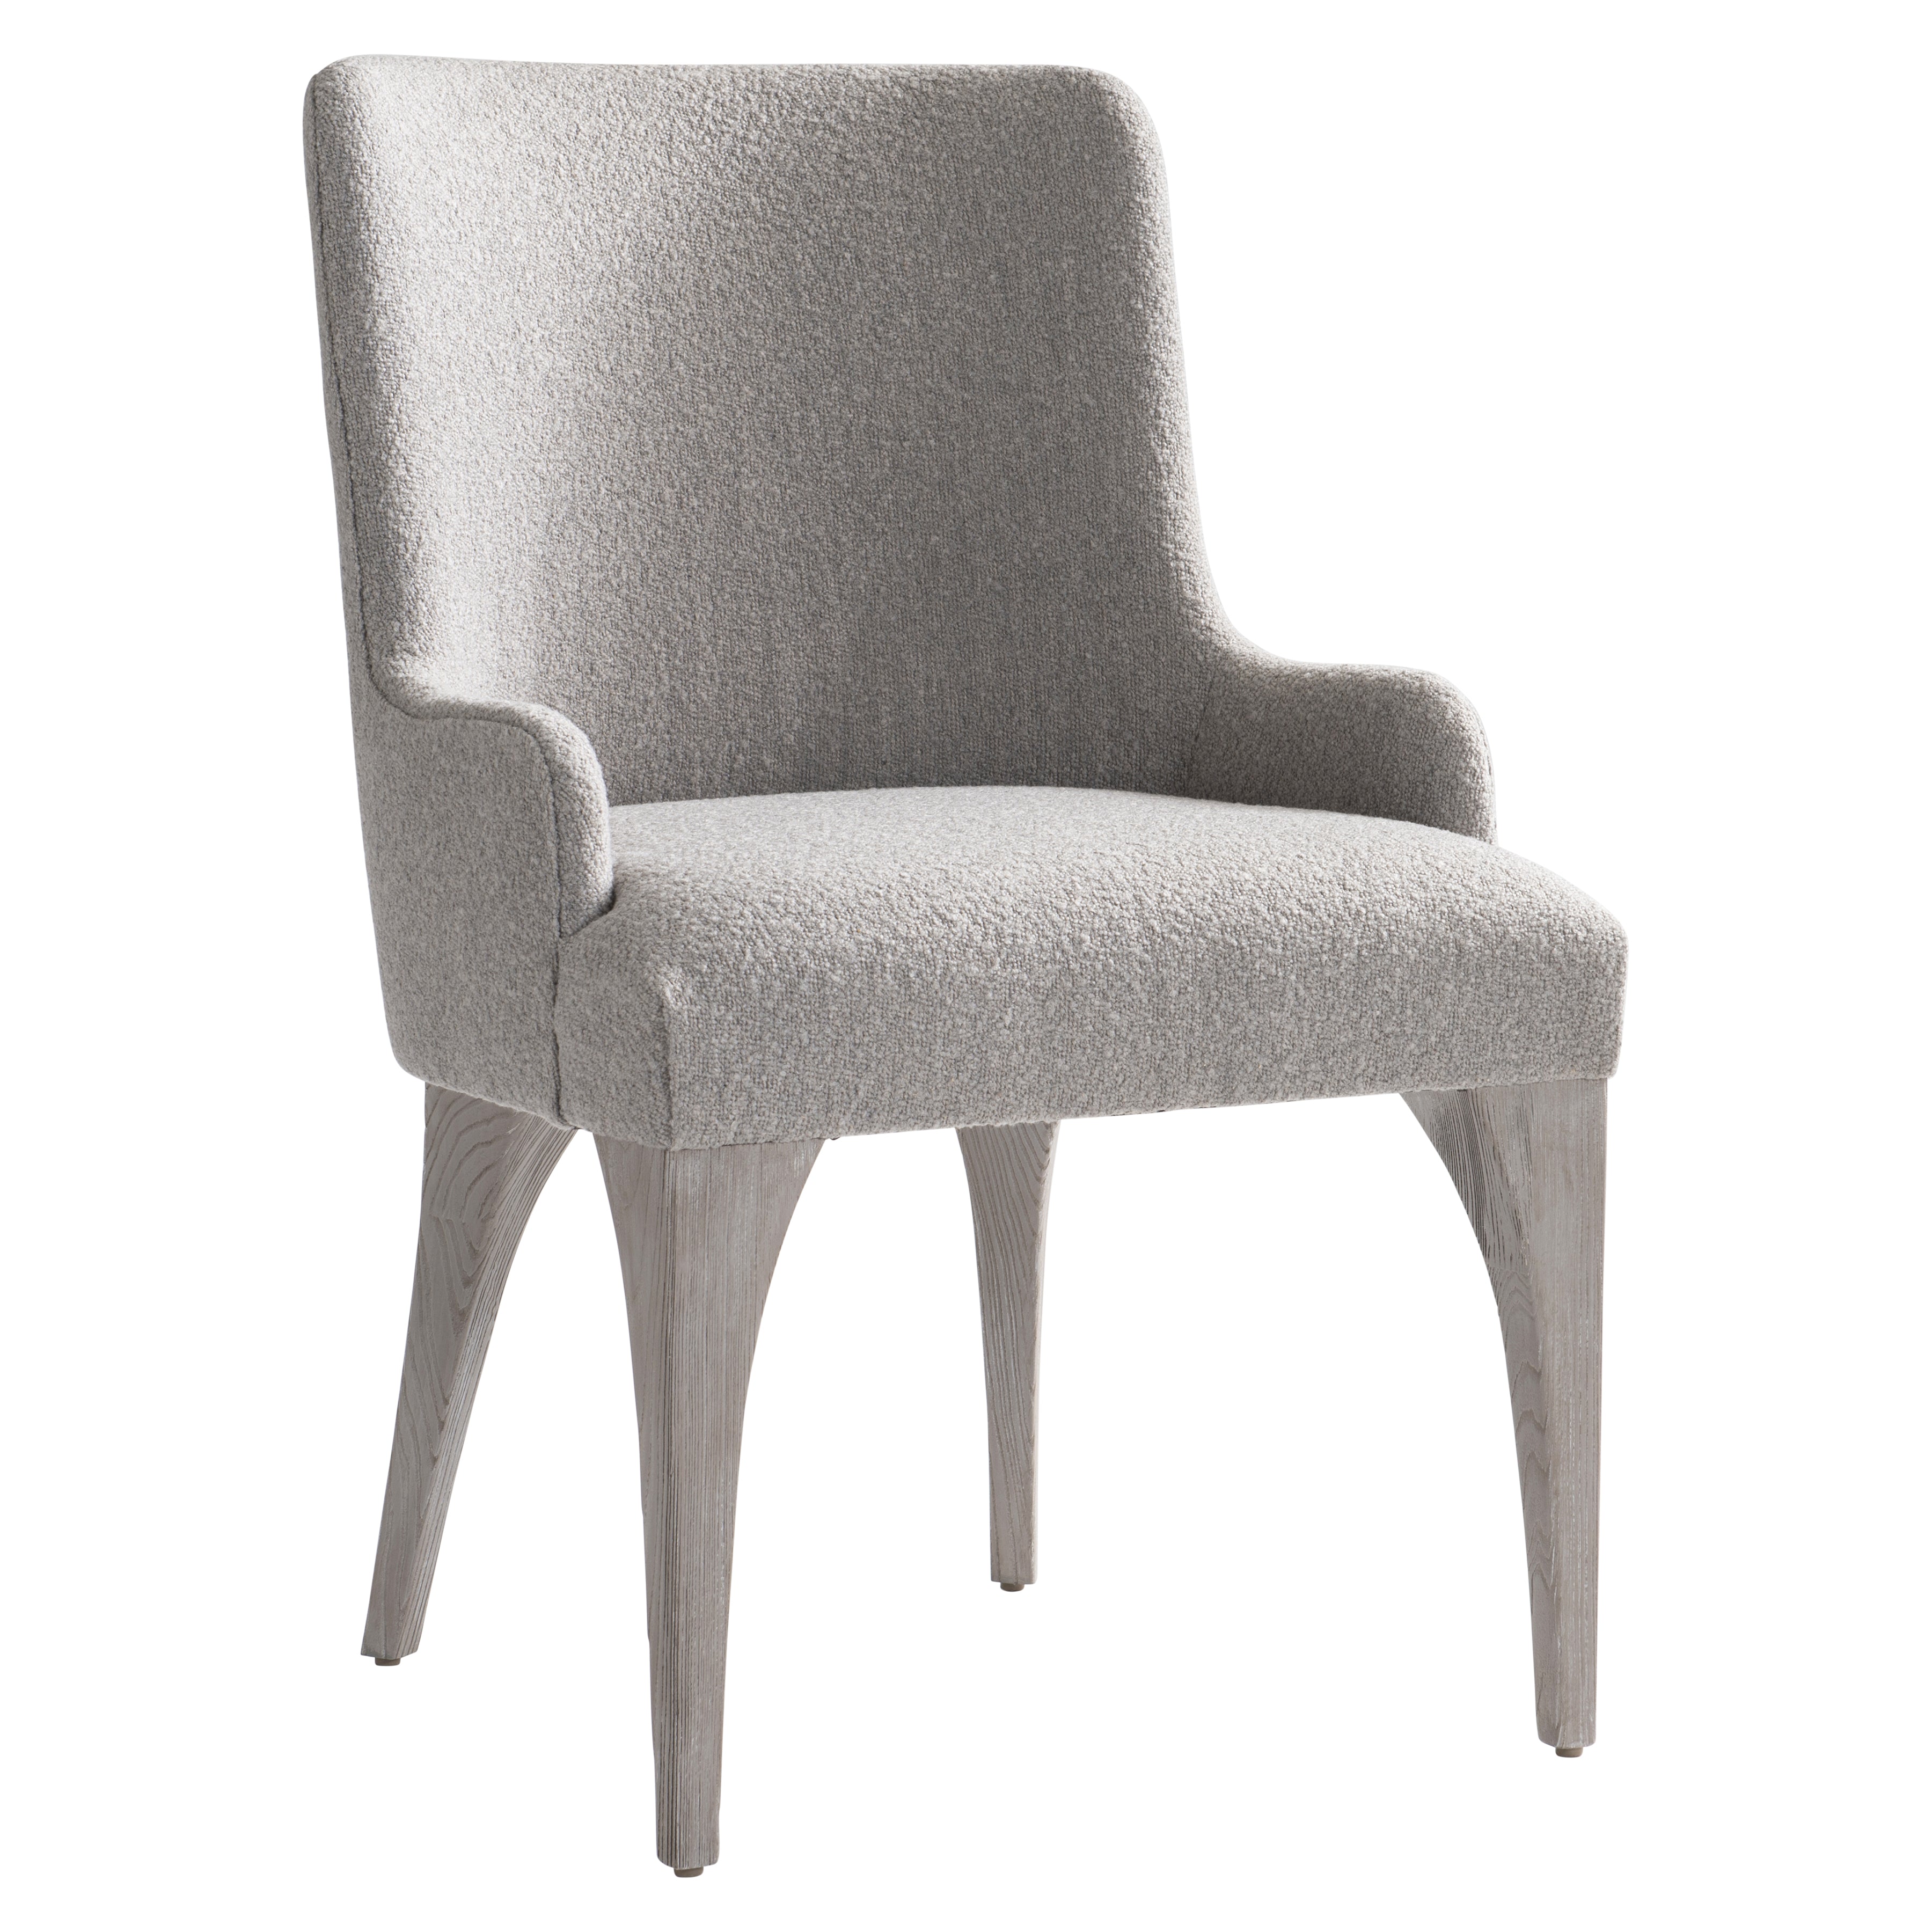 Trianon Arm Chair with Curved Back